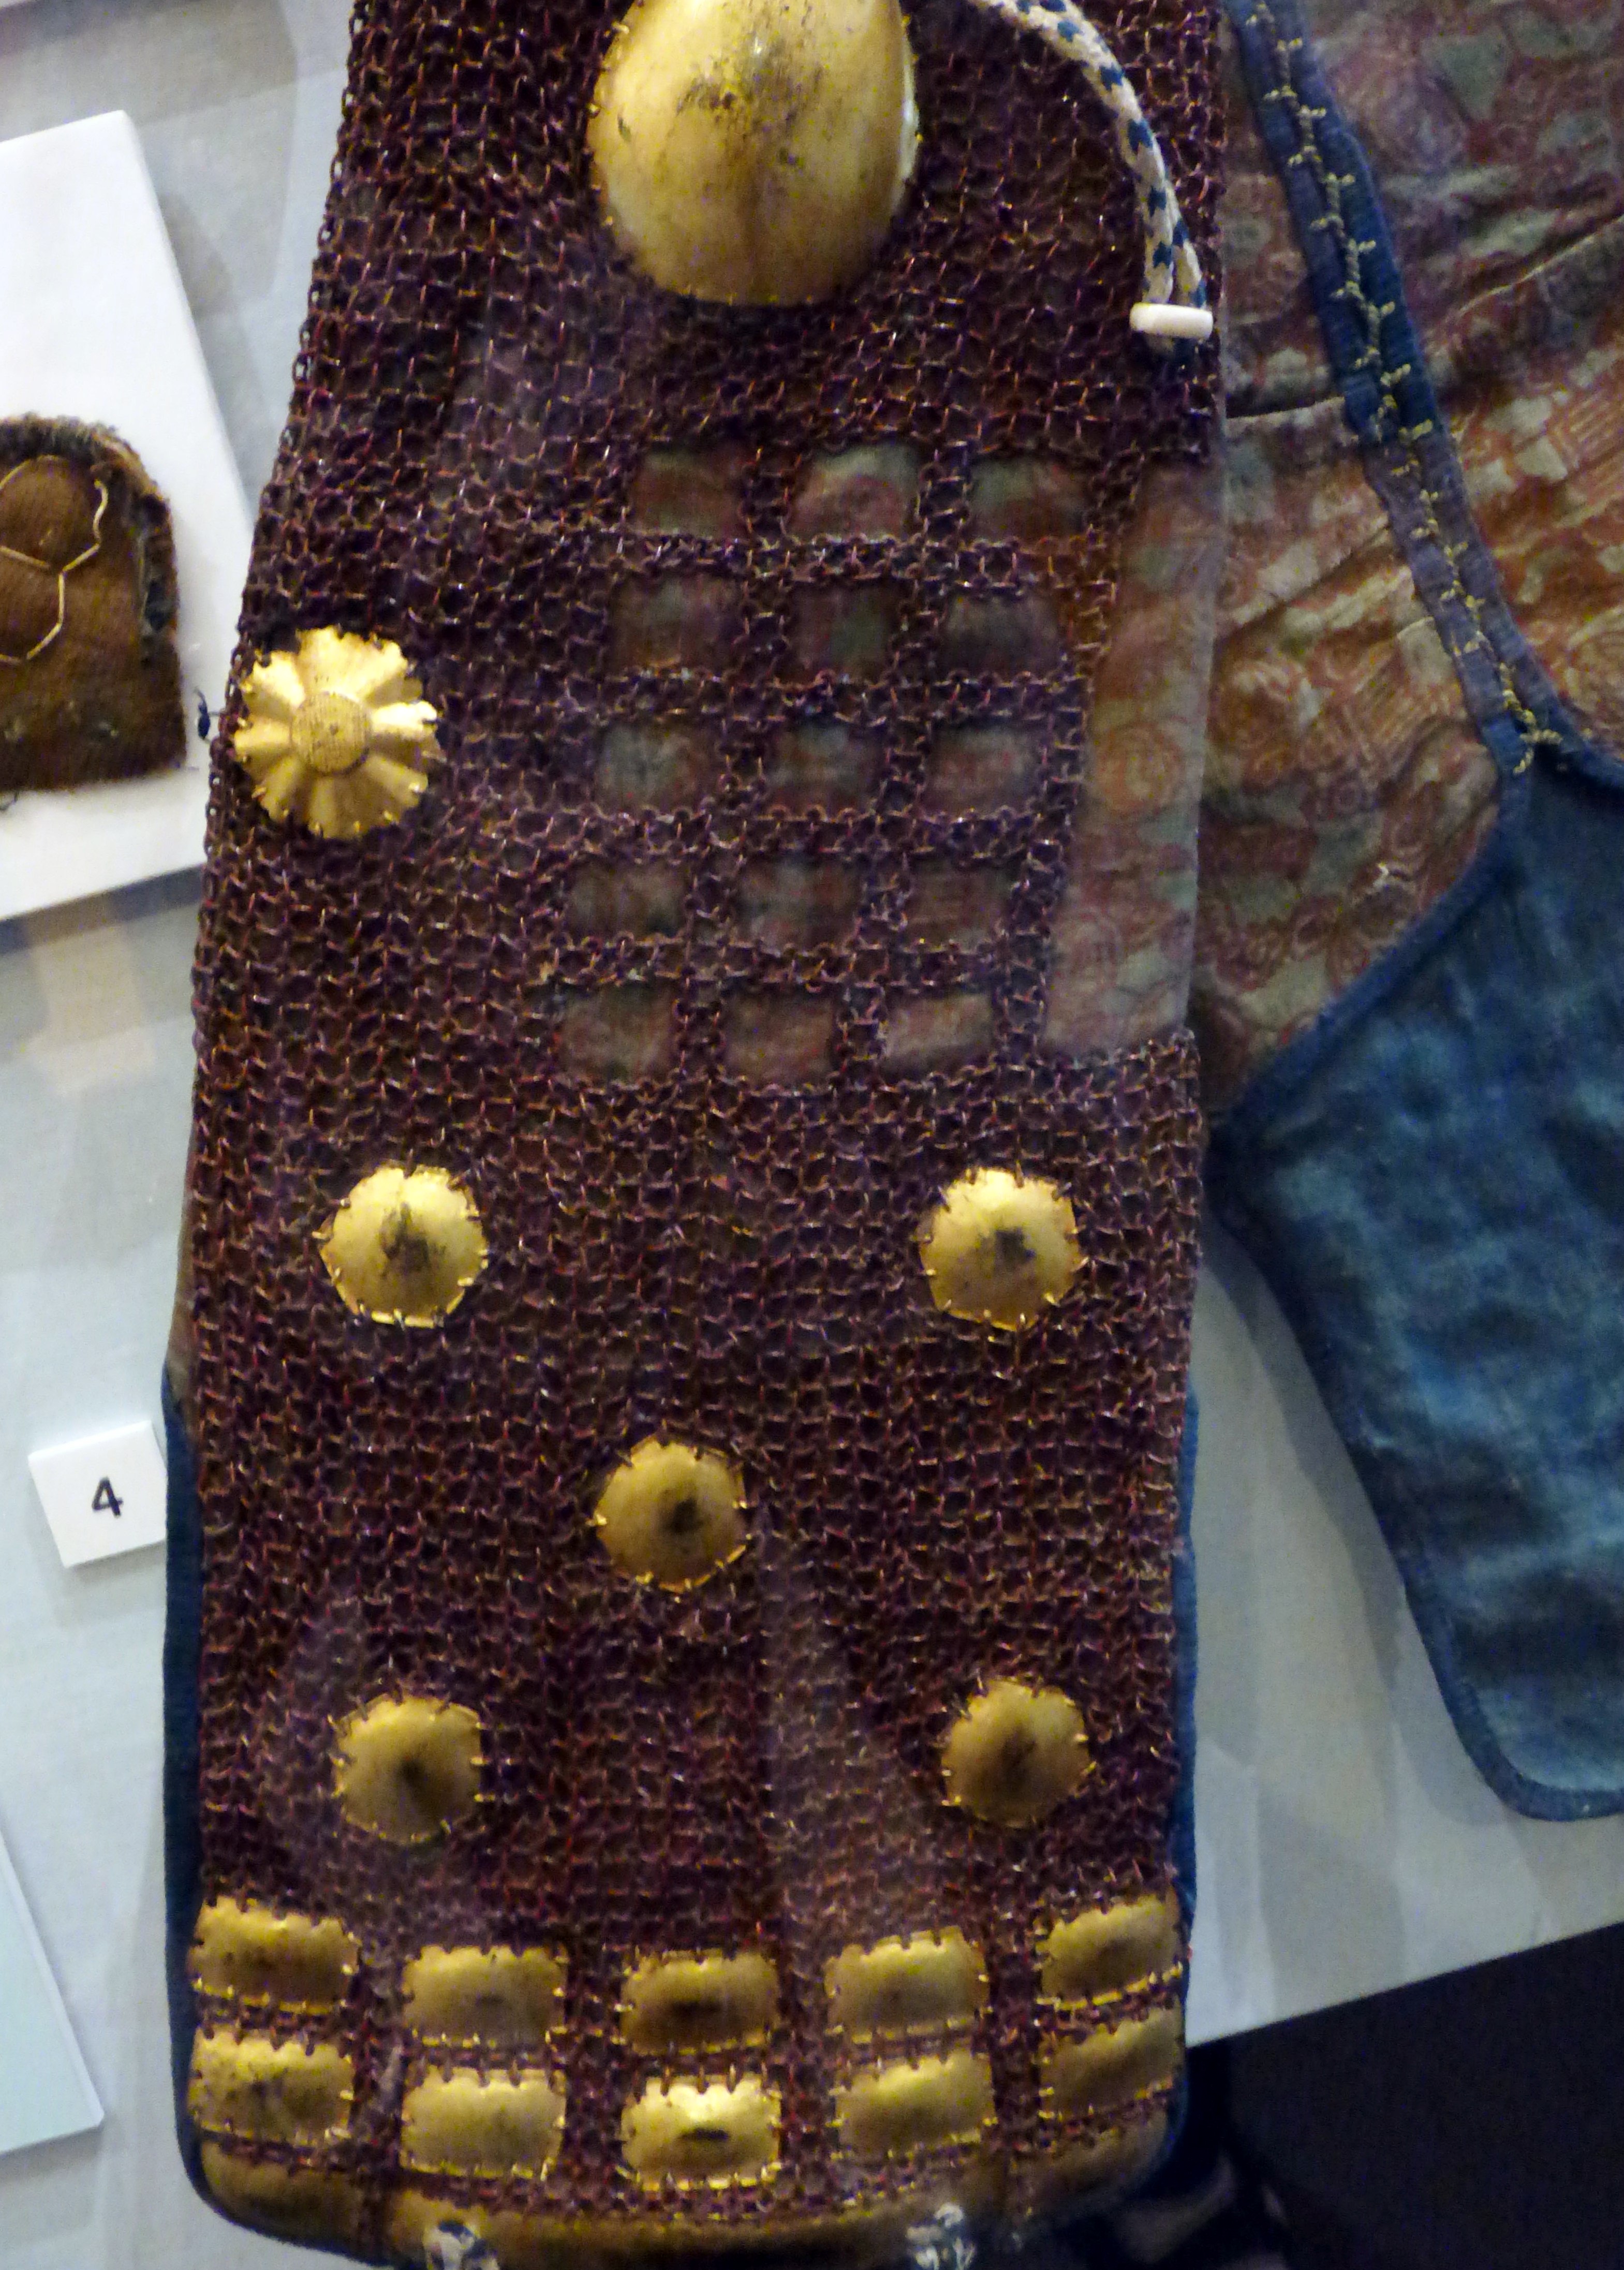 ARMOURED SLEEVES, gold and iron plates on a fabric foundation, Japanese 19th century, Royal Armouries Museum, Leeds